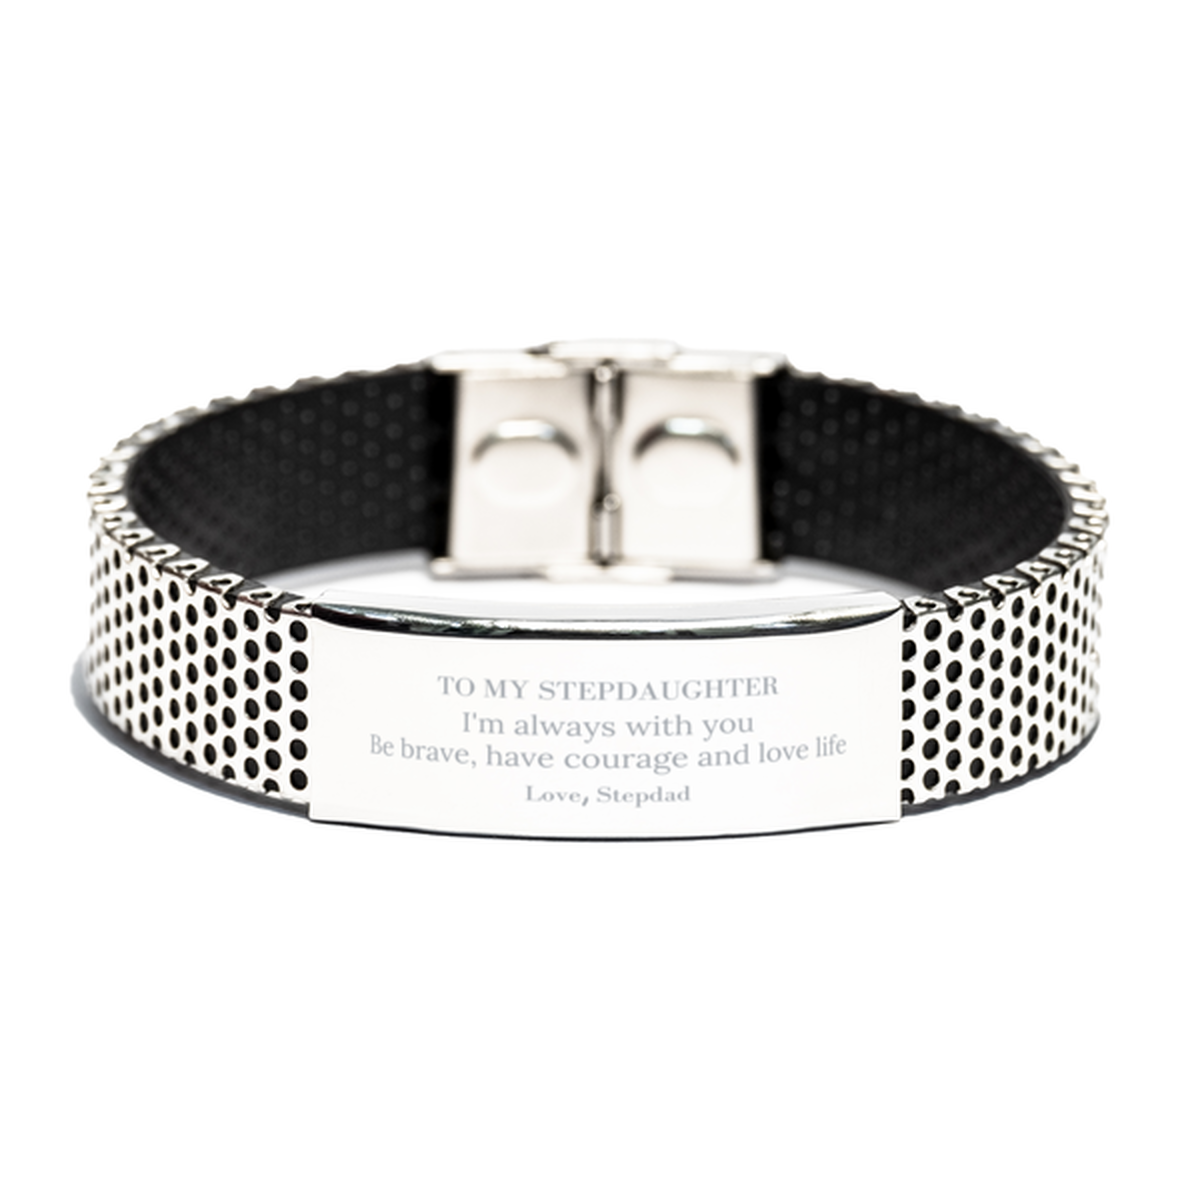 To My Stepdaughter Gifts from Stepdad, Unique Stainless Steel Bracelet Inspirational Christmas Birthday Graduation Gifts for Stepdaughter I'm always with you. Be brave, have courage and love life. Love, Stepdad